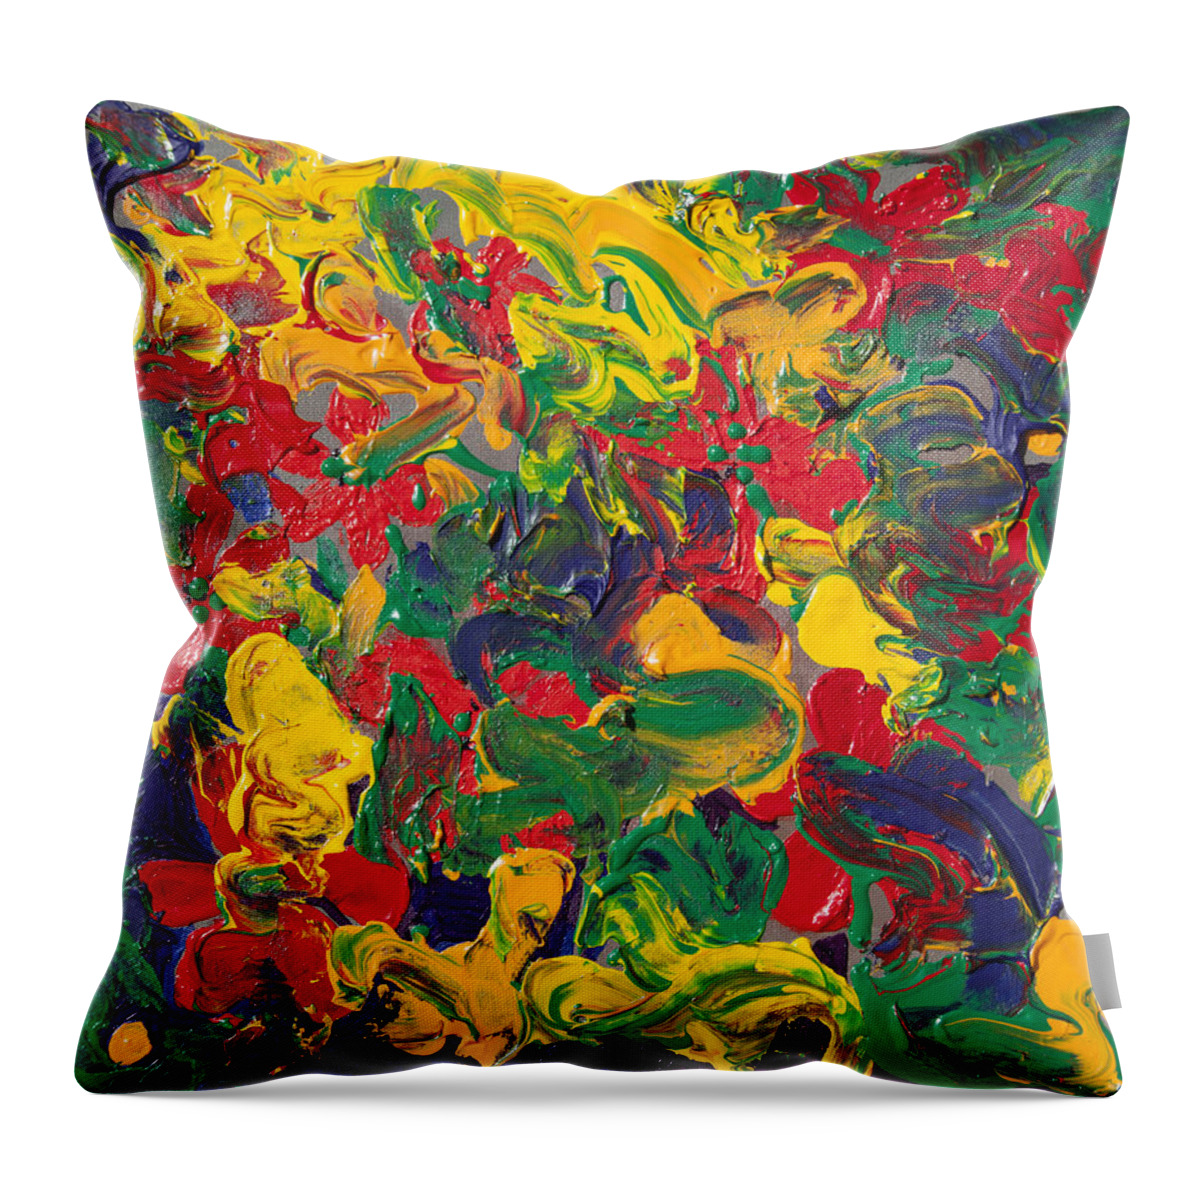 Abstract Throw Pillow featuring the painting Abstract Painting - Color Explosion by Portraits By NC